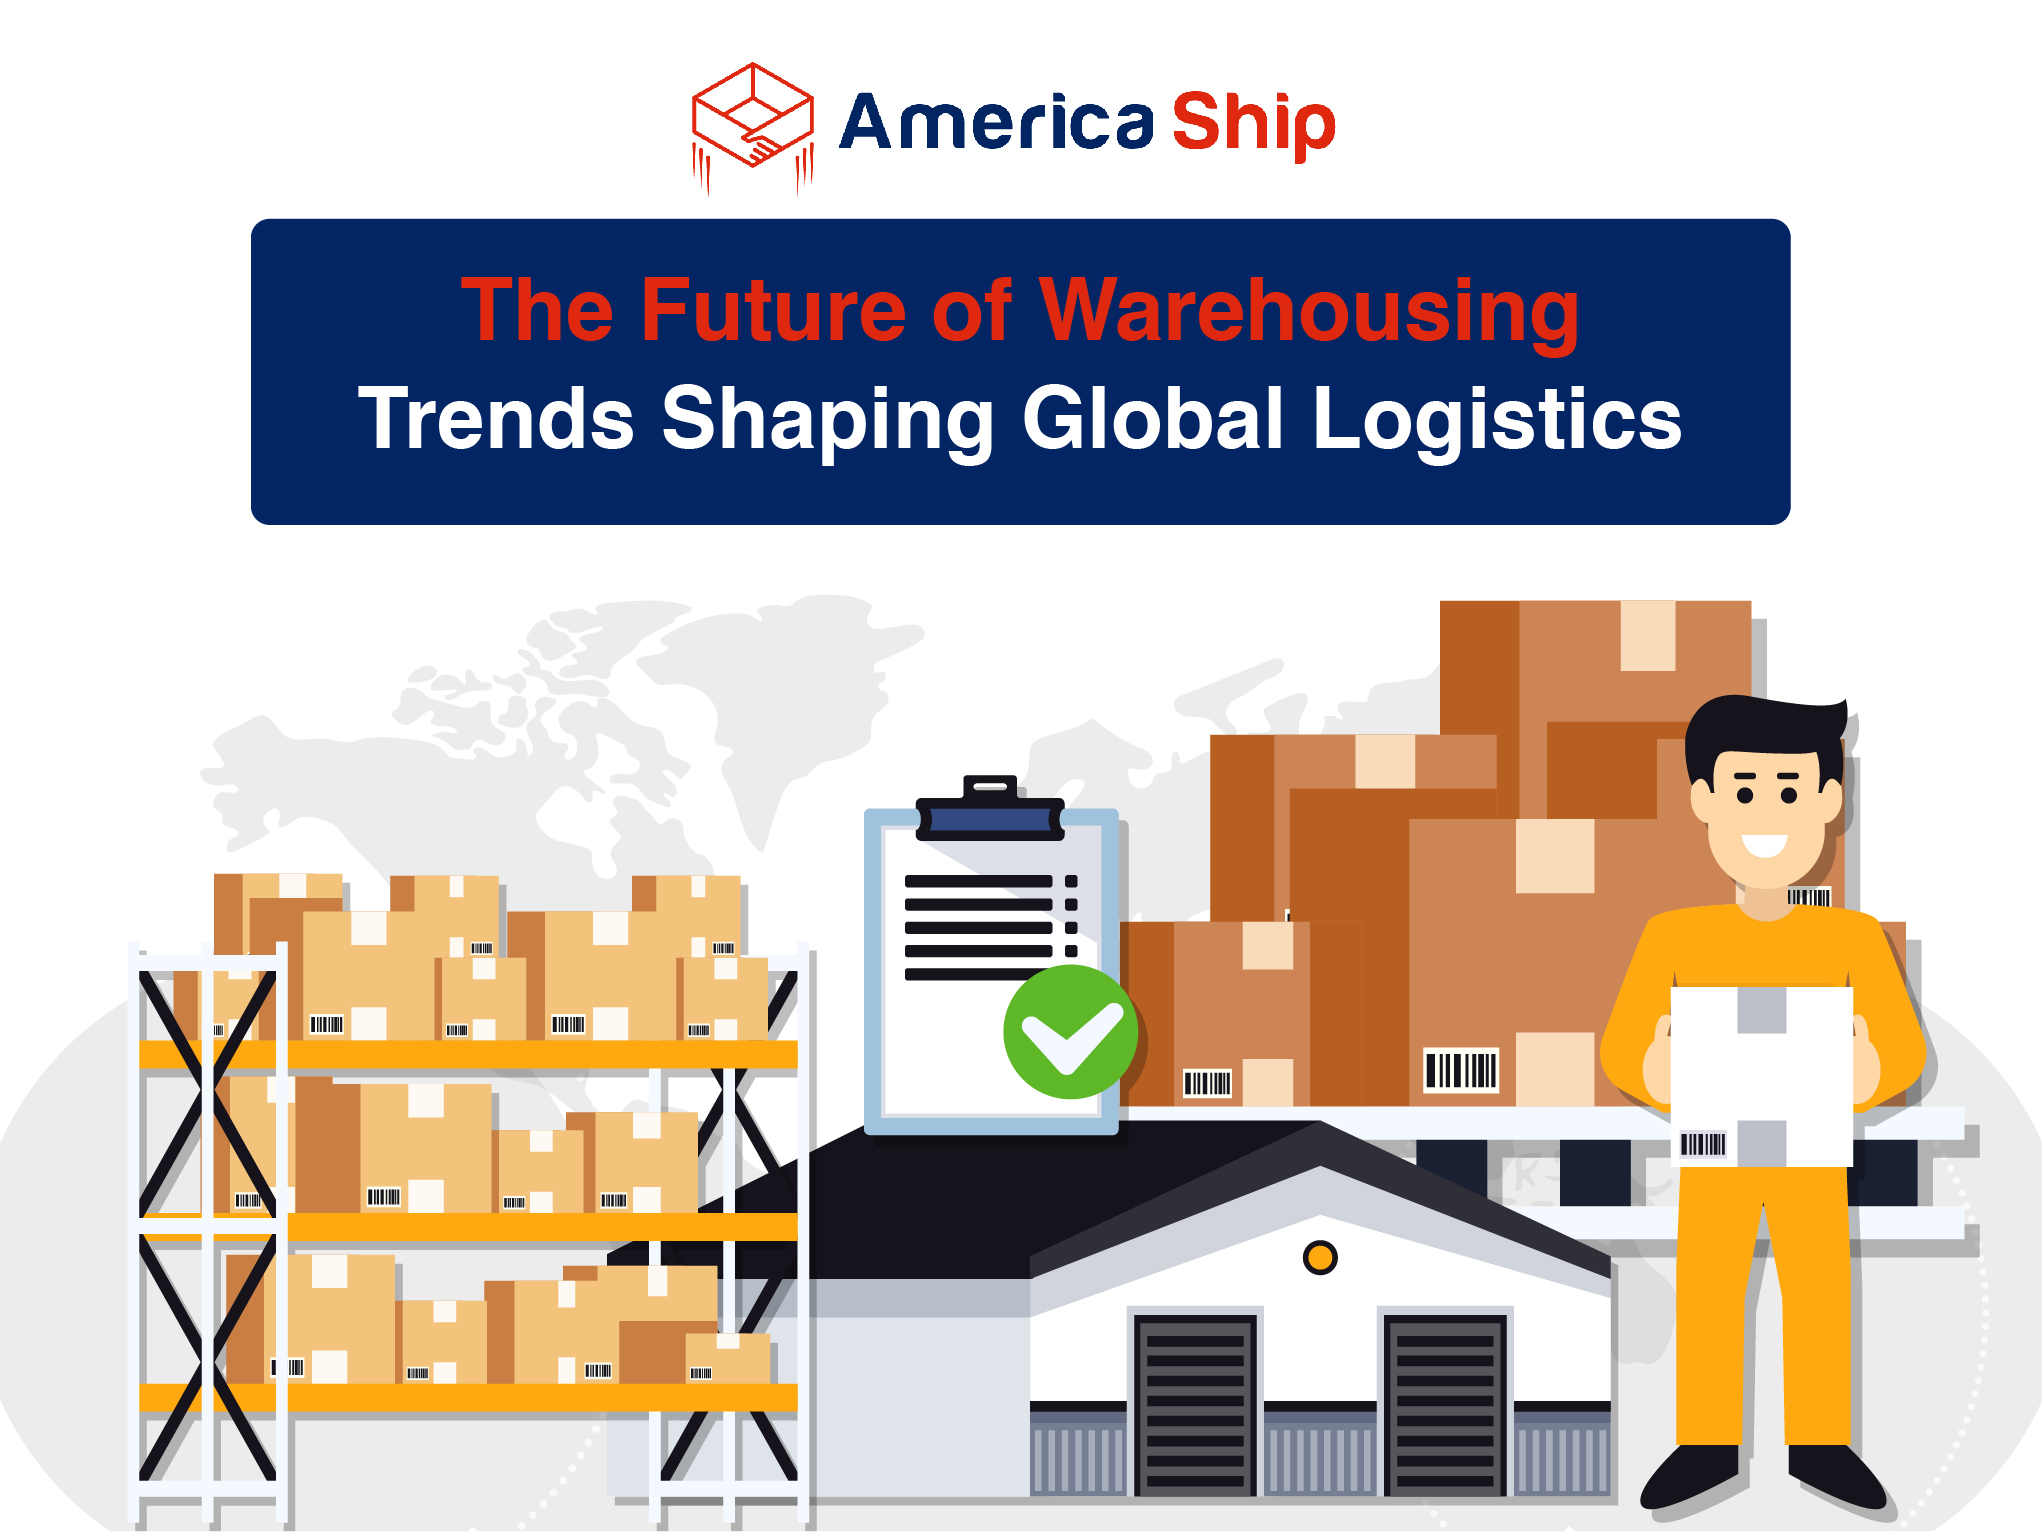 The Future of Warehousing: Trends Shaping Global Logistics